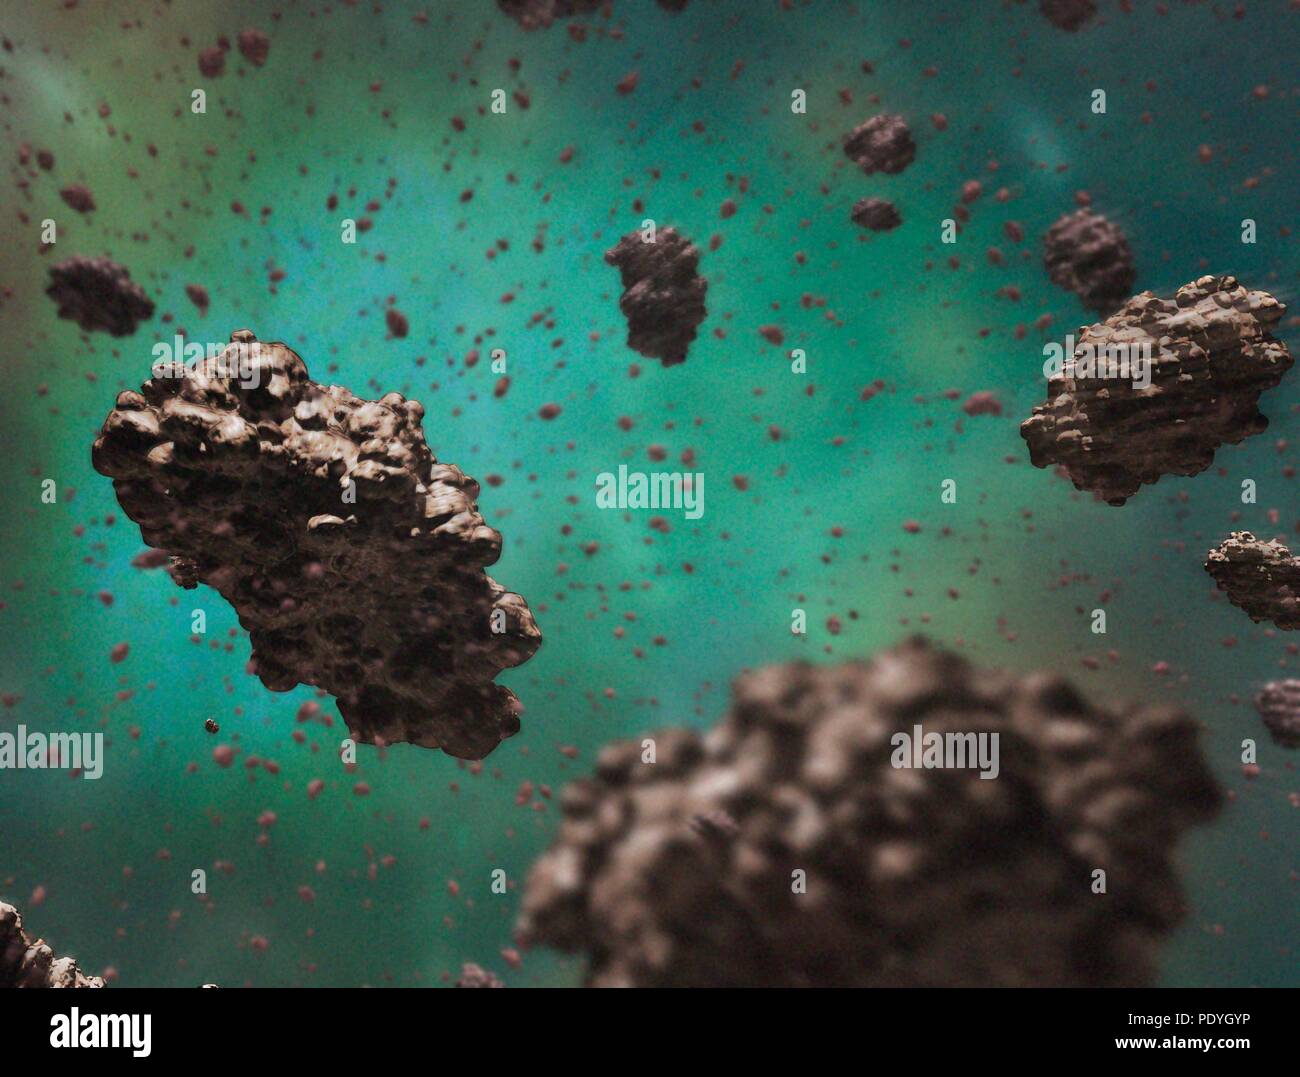 Illustration of the grains found within interstellar dust and giant molecular clouds. Called cosmic dust or space dust, these particles are up to 0.1 micrometres across, but can be as small as just a few molecules. The grains are made of dust grains and aggregates of dust grains. Stock Photo